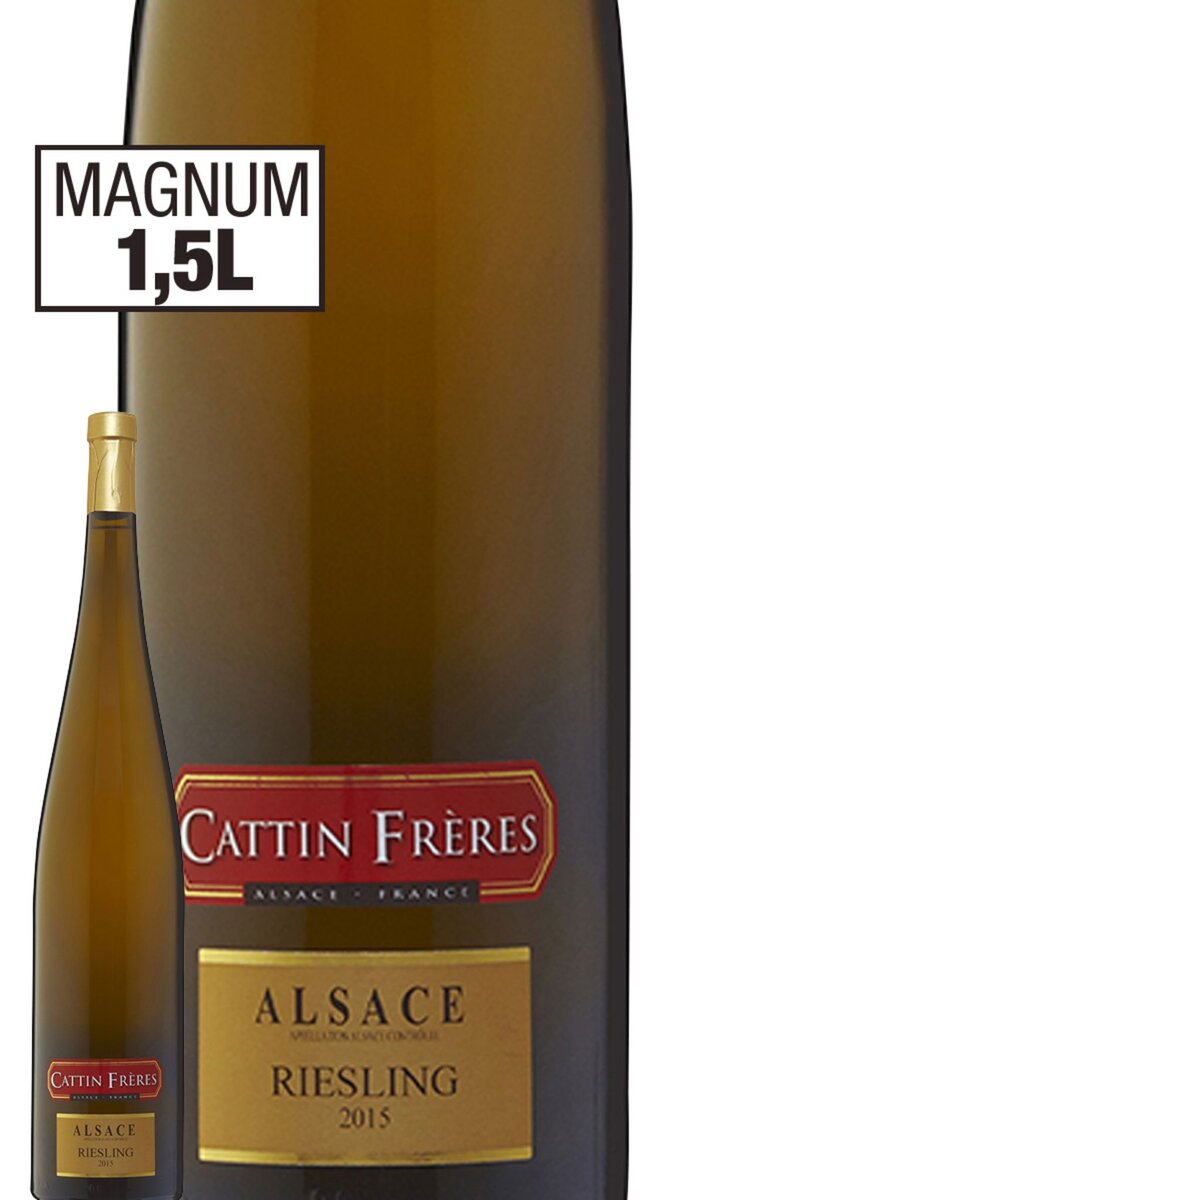 Cattin Frères Alsace Riesling Magnum Blanc 2015